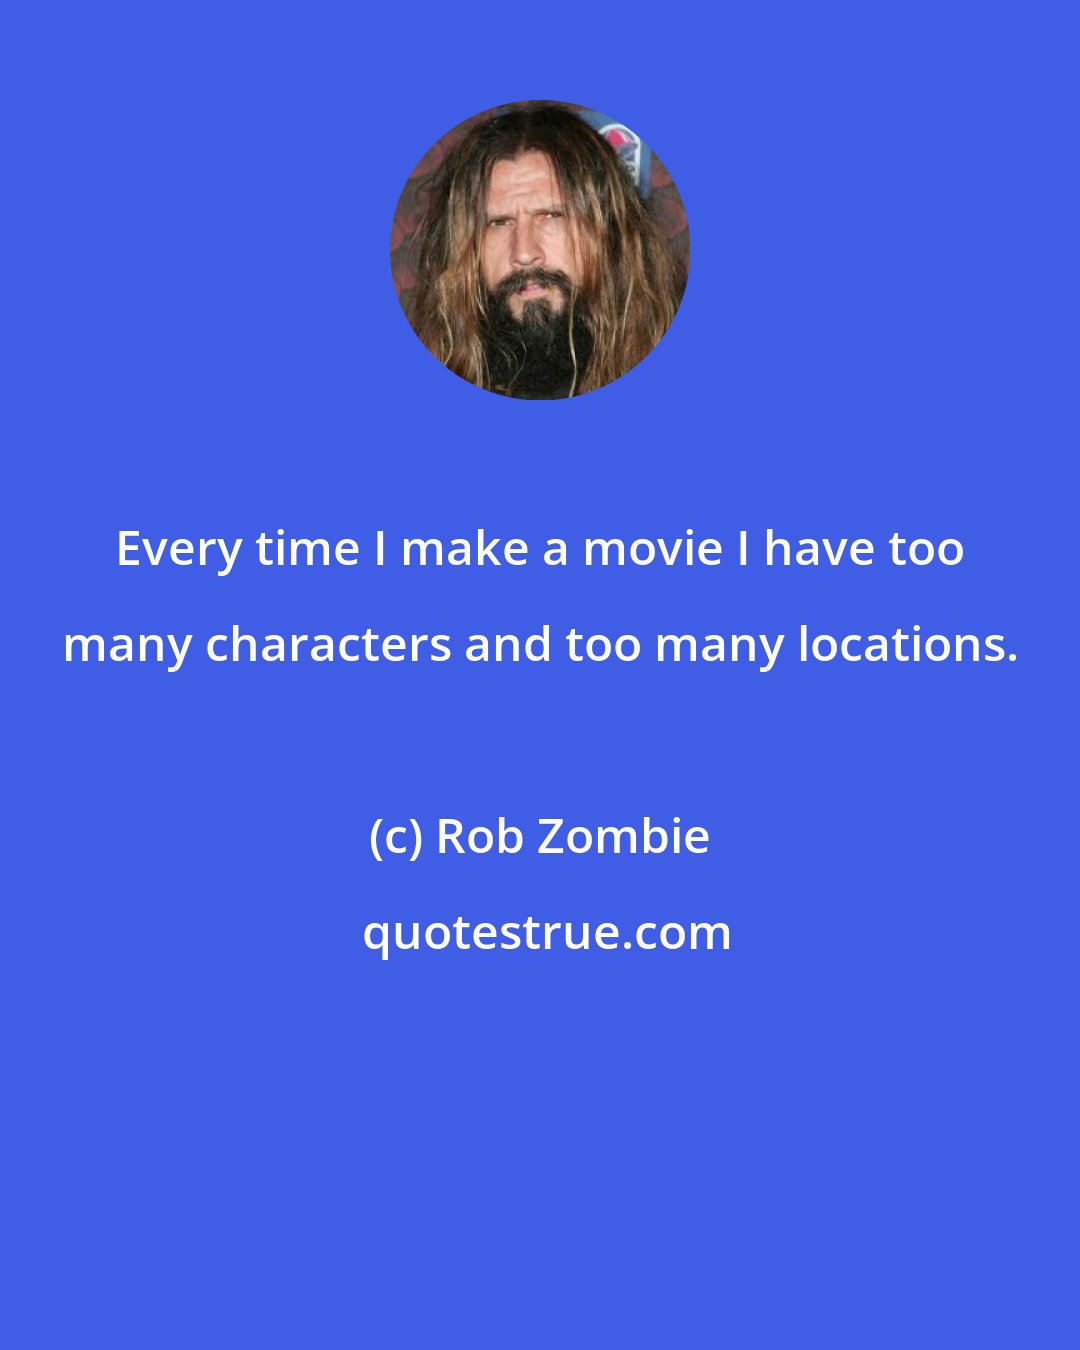 Rob Zombie: Every time I make a movie I have too many characters and too many locations.